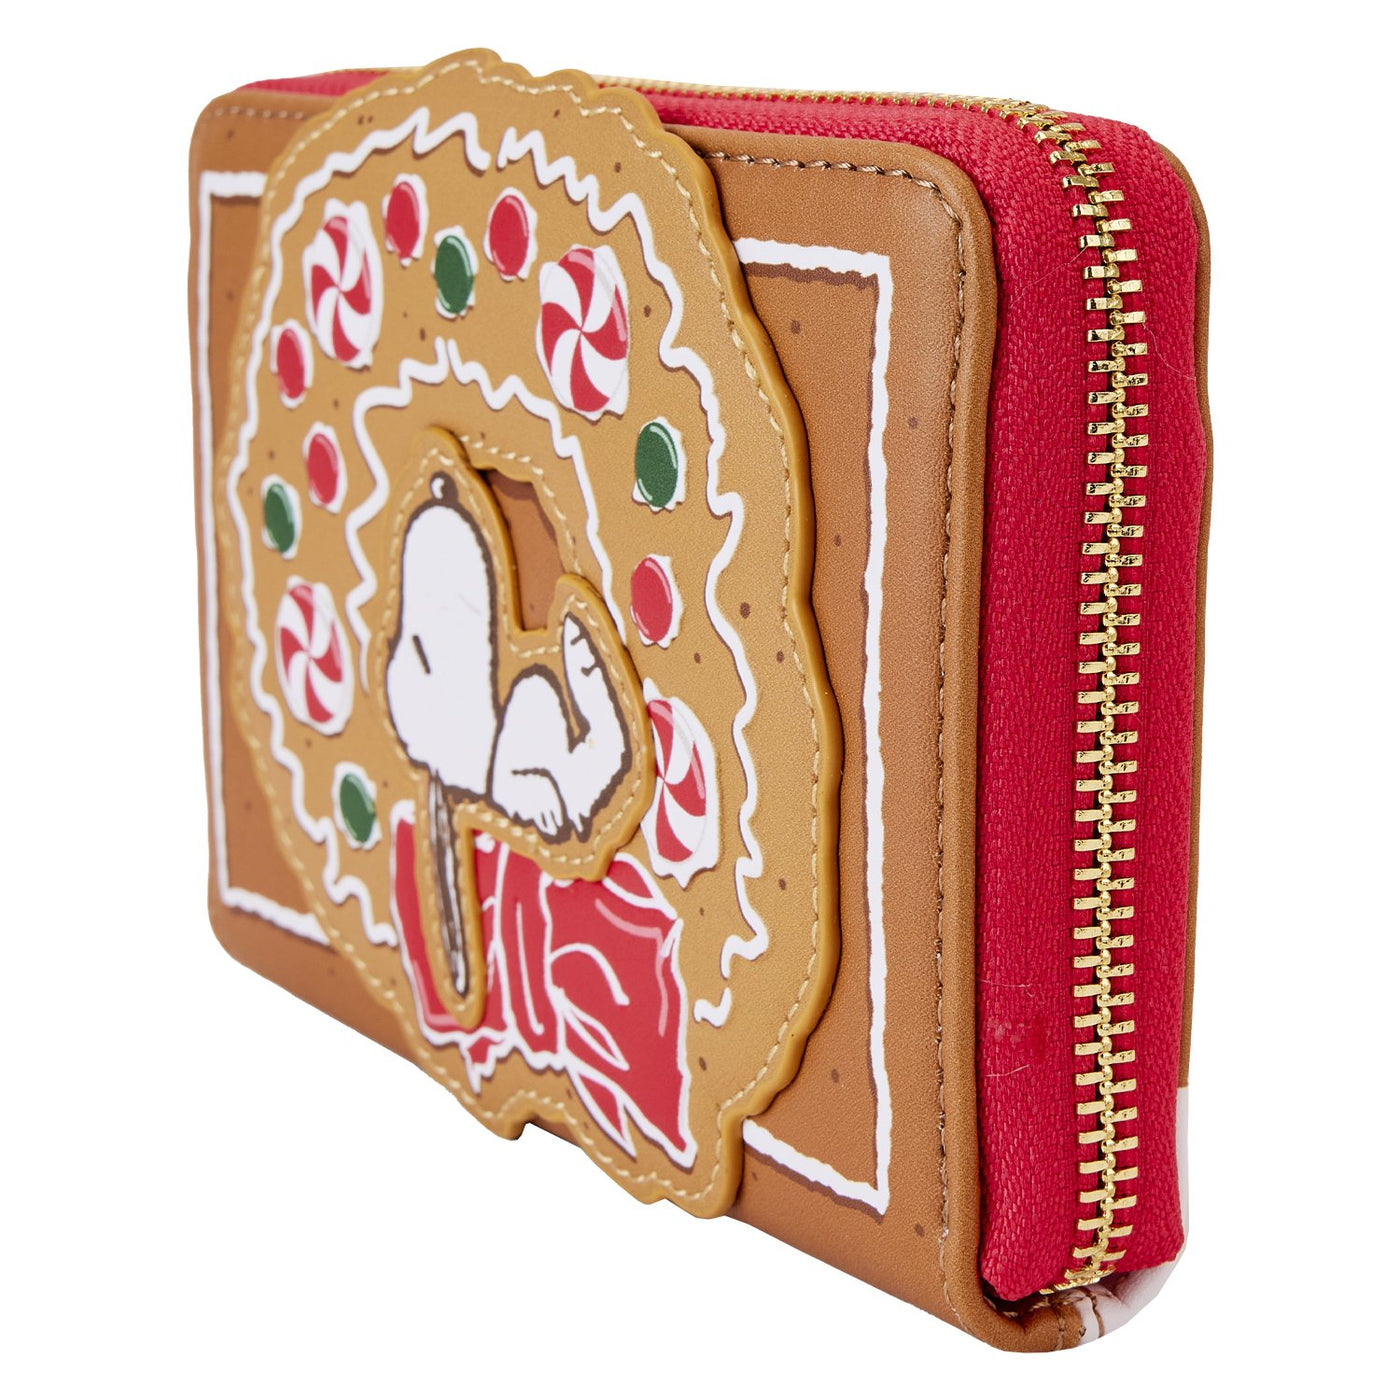 Loungefly Peanuts Snoopy Gingerbread Wreath Zip-Around Wallet - Side View